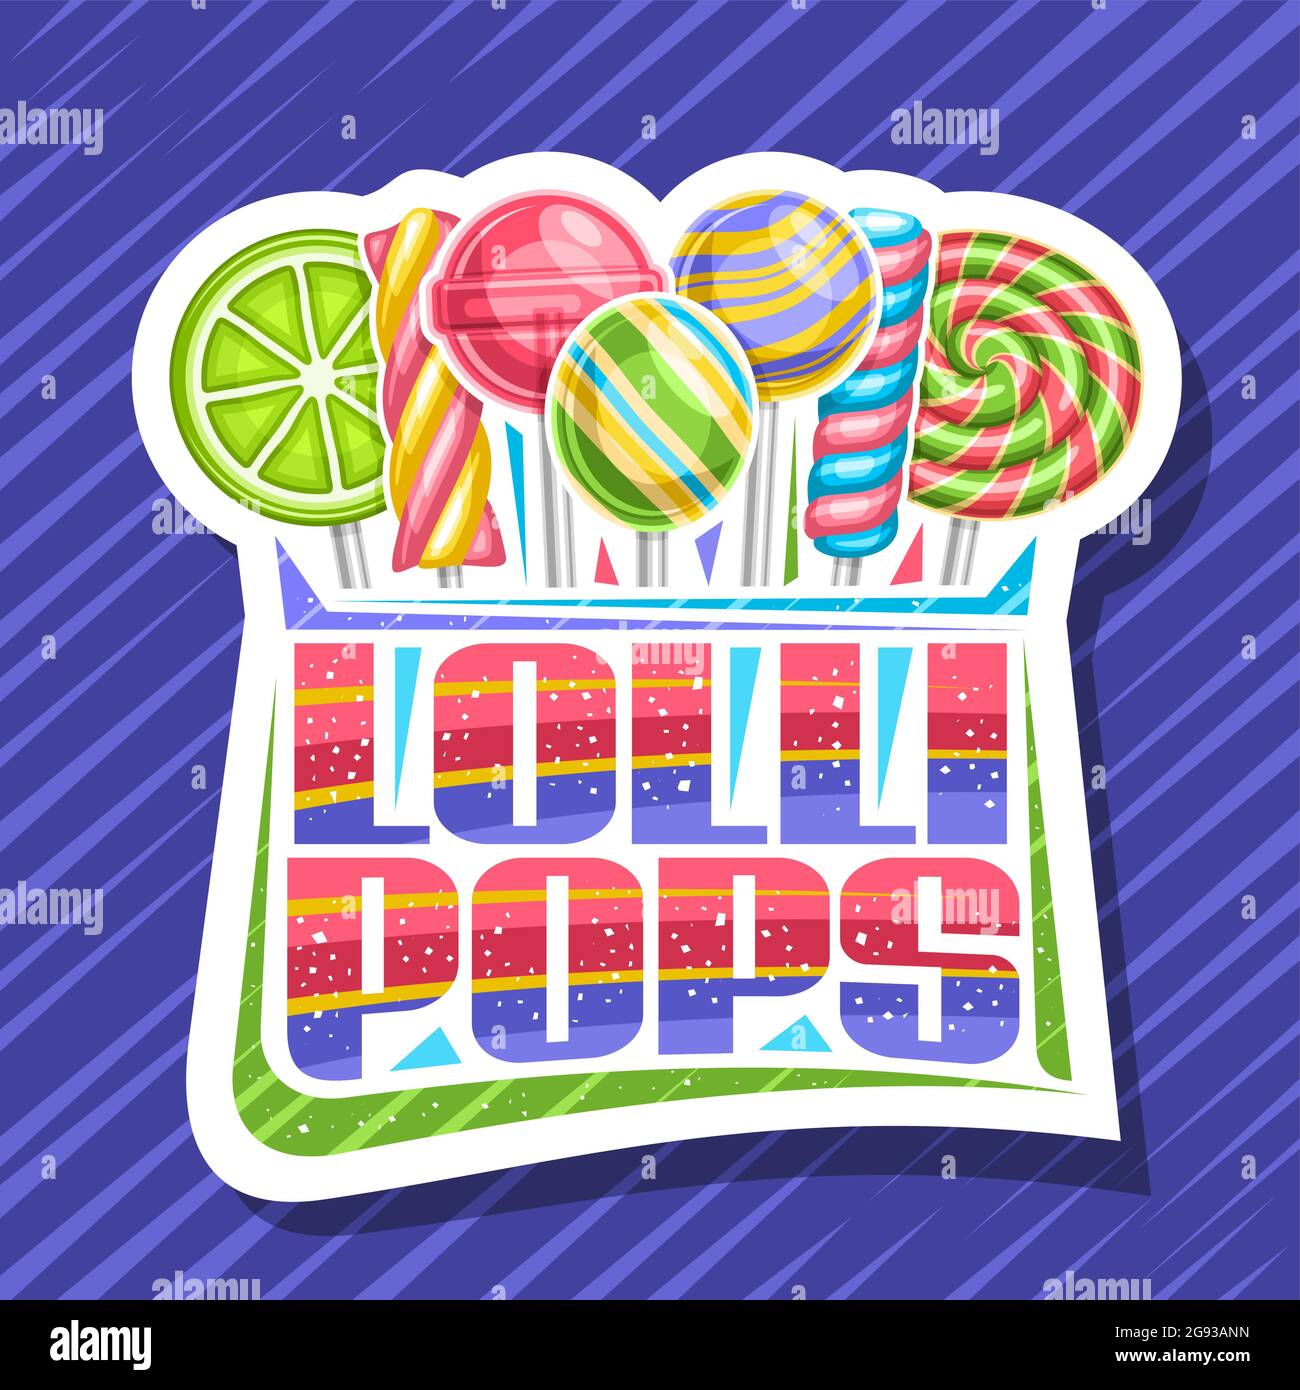 Vector logo for Lollipops, decorative cut paper sign board with illustration of variety striped lollipop, square poster with unique brush lettering fo Stock Vector